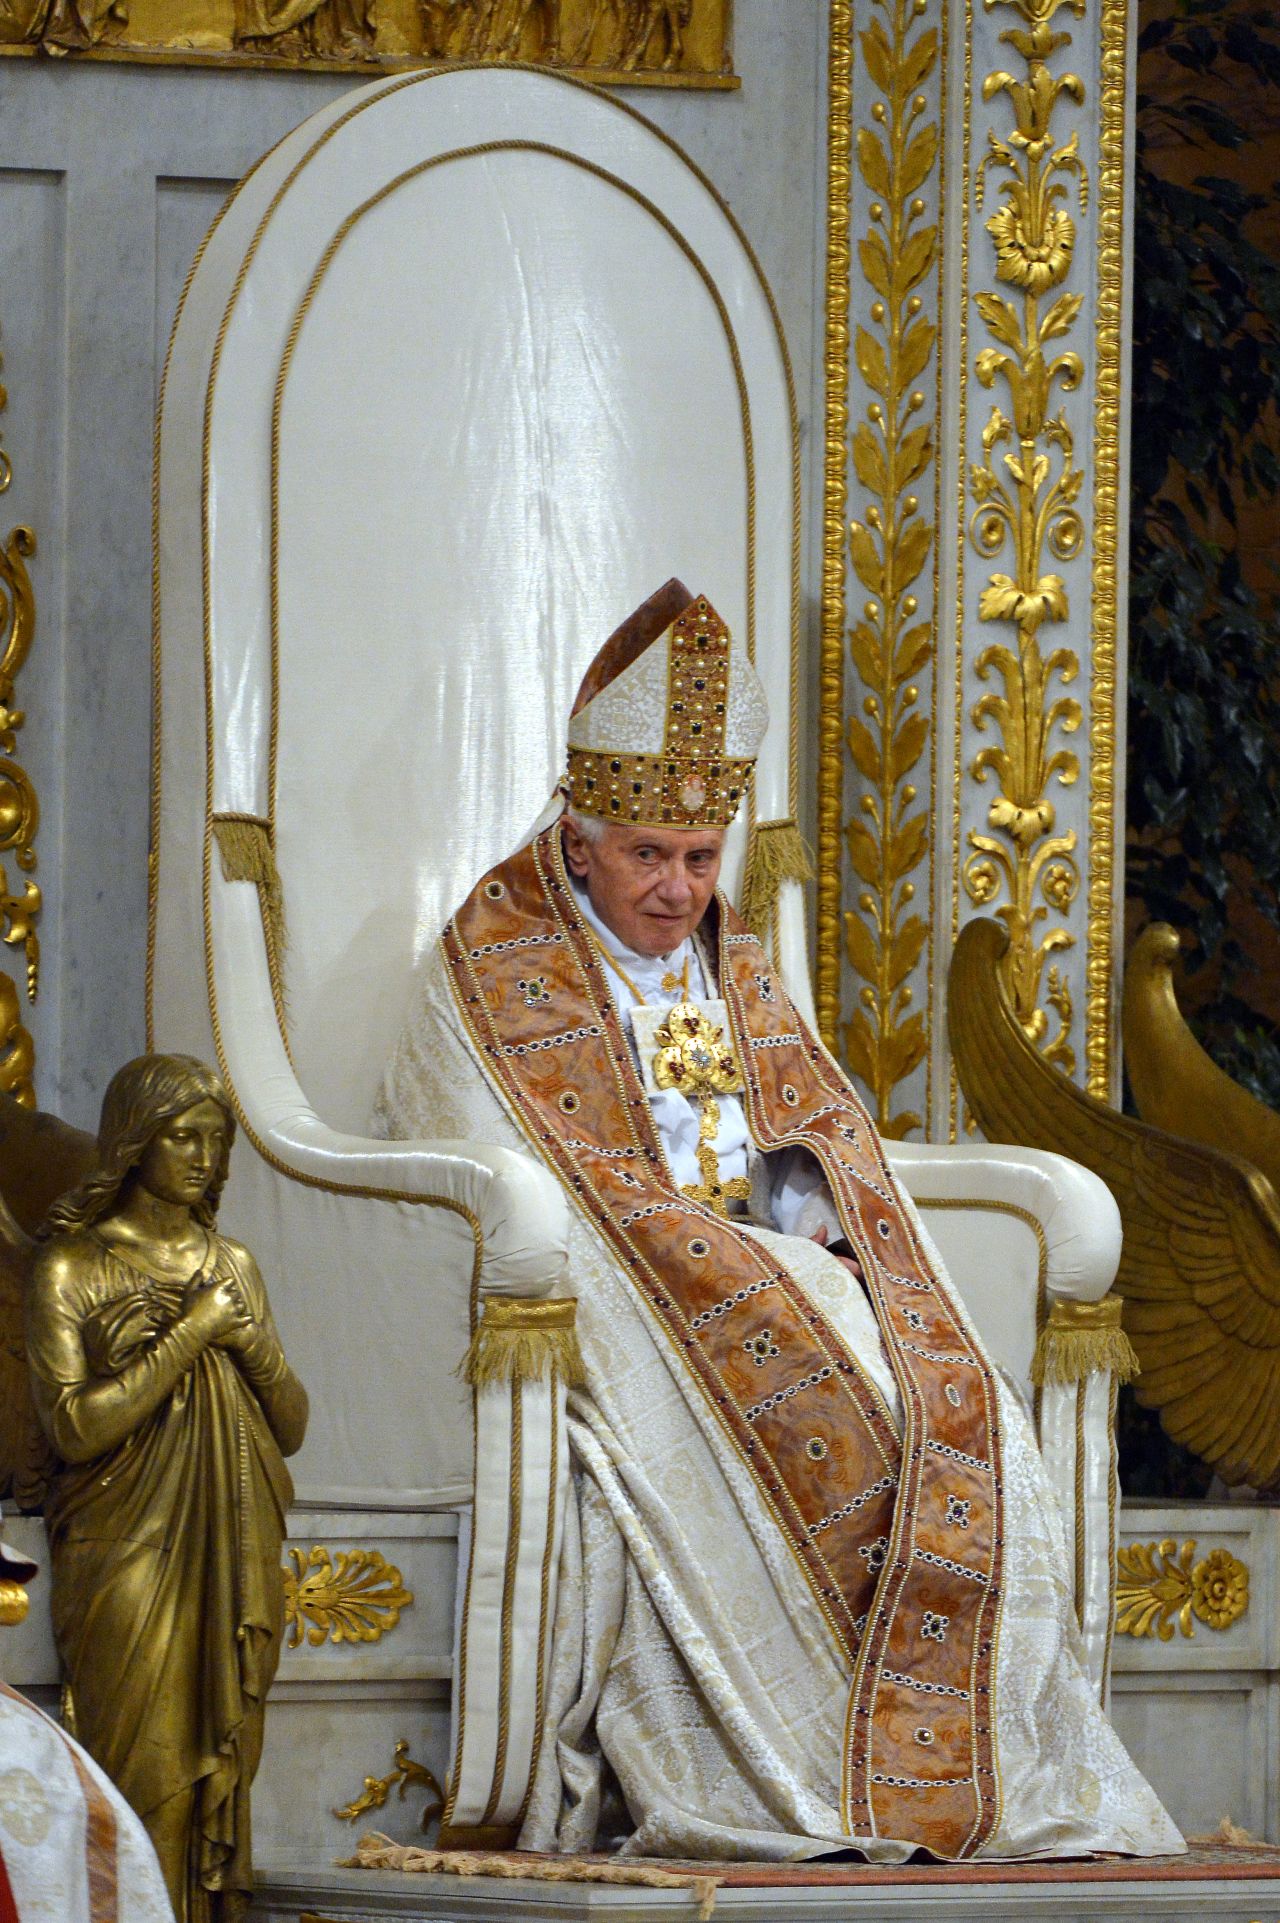 The mantum is a long cape that popes sometimes wear as a sign of their authority, Beck said. It's a vestment that fell out of use, but was revived by Benedict XVI, seen here. The mitre, Beck said, is a cone-like head dress worn by all bishops as a sign of their episcopacy. "Abbots can also wear it," Beck said. "It is not unique to the pope, but it replaced the tiara on the Papal Coat of Arms with Benedict, and now Francis."